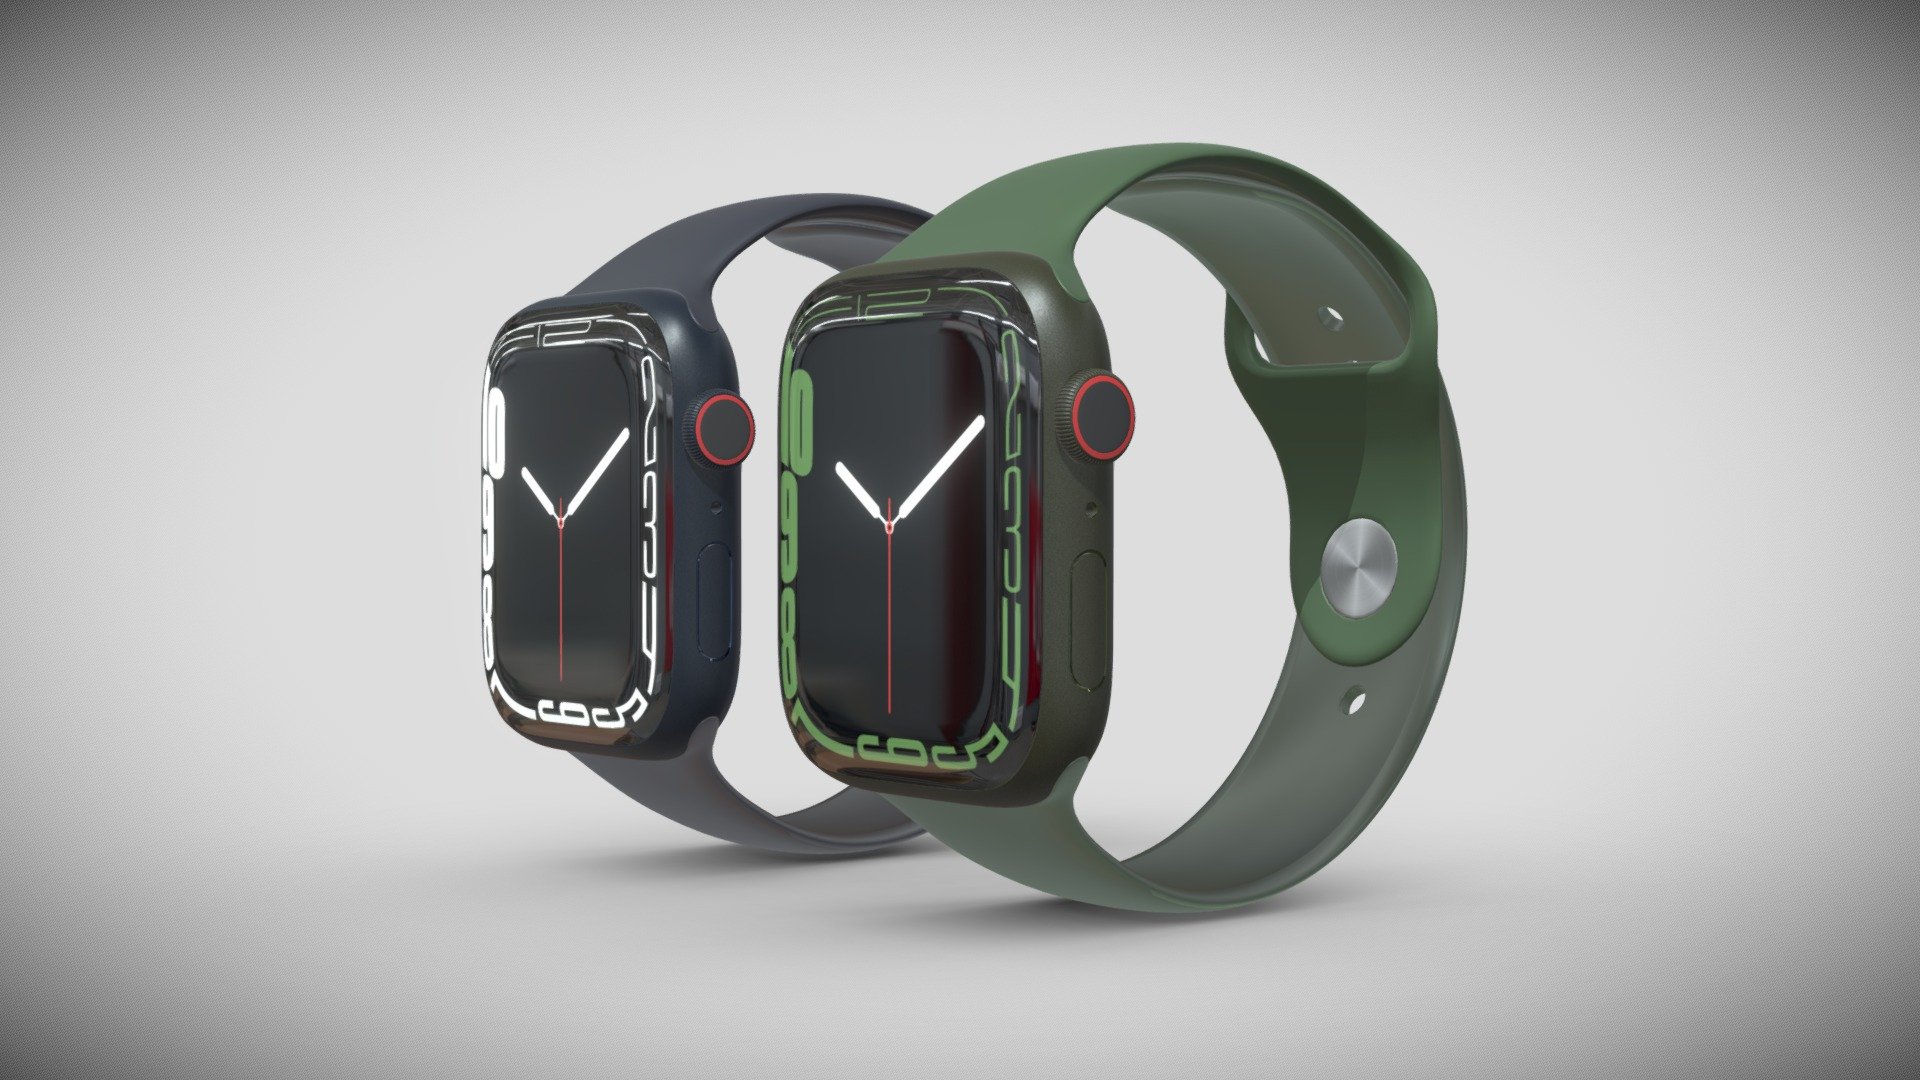 Realistic (copy) 3d model of Apple Watch Series 7.

This set:
- 1 file obj standard
- 1 file 3ds Max 2013 vray material
- 1 file 3ds Max 2013 corona material
- 1 file 3ds Max 2013 standard material
- 1 file of 3Ds
- 2 file e3d full set of materials.
- 1 file cinema 4d standard.
- 2 file blender cycles.

Topology of geometry:
- forms and proportions of The 3D model
- the geometry of the model was created very neatly
- there are no many-sided polygons
- detailed enough for close-up renders
- the model optimized for turbosmooth modifier
- Not collapsed the turbosmooth modified
- apply the Smooth modifier with a parameter to get the desired level of detail

Organization of scene:
- to all objects and materials
- real world size (system units - mm)
- coordinates of location of the model in space (x0, y0, z0)
- does not contain extraneous or hidden objects (lights, cameras, shapes etc.) - Apple Watch Series 7 - Buy Royalty Free 3D model by madMIX 3d model